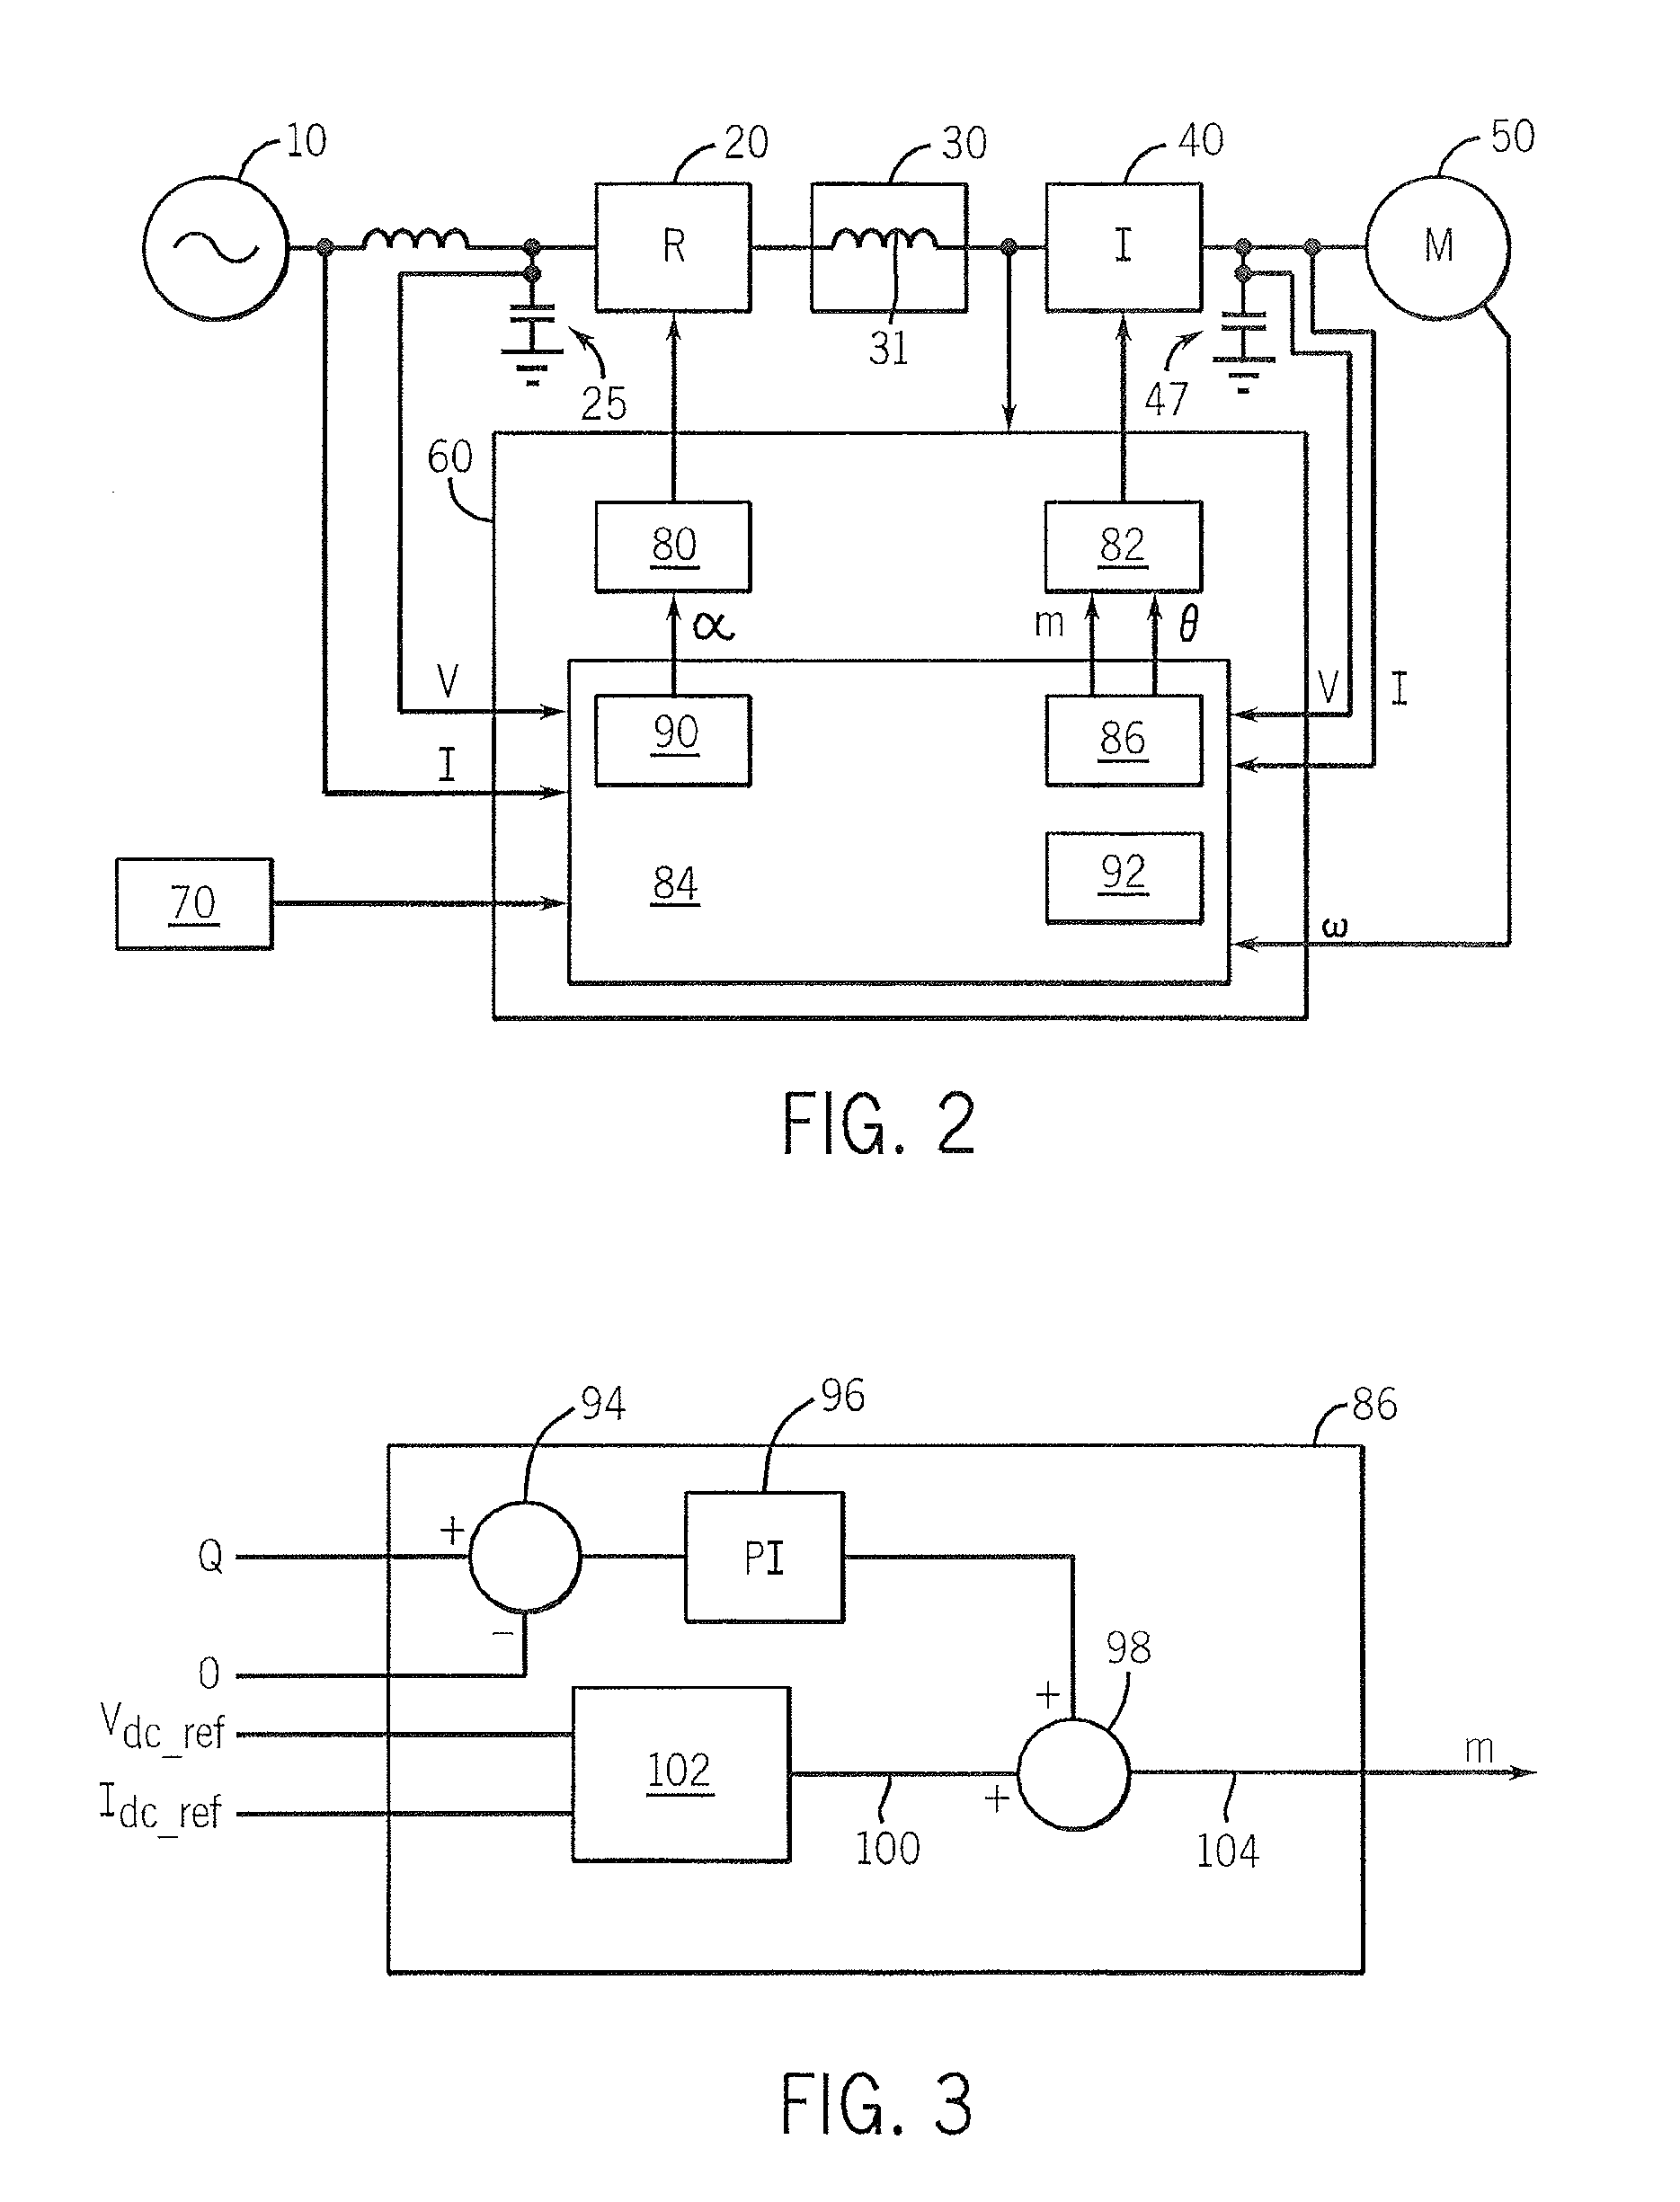 Motor Drive Using Flux Adjustment to Control Power Factor